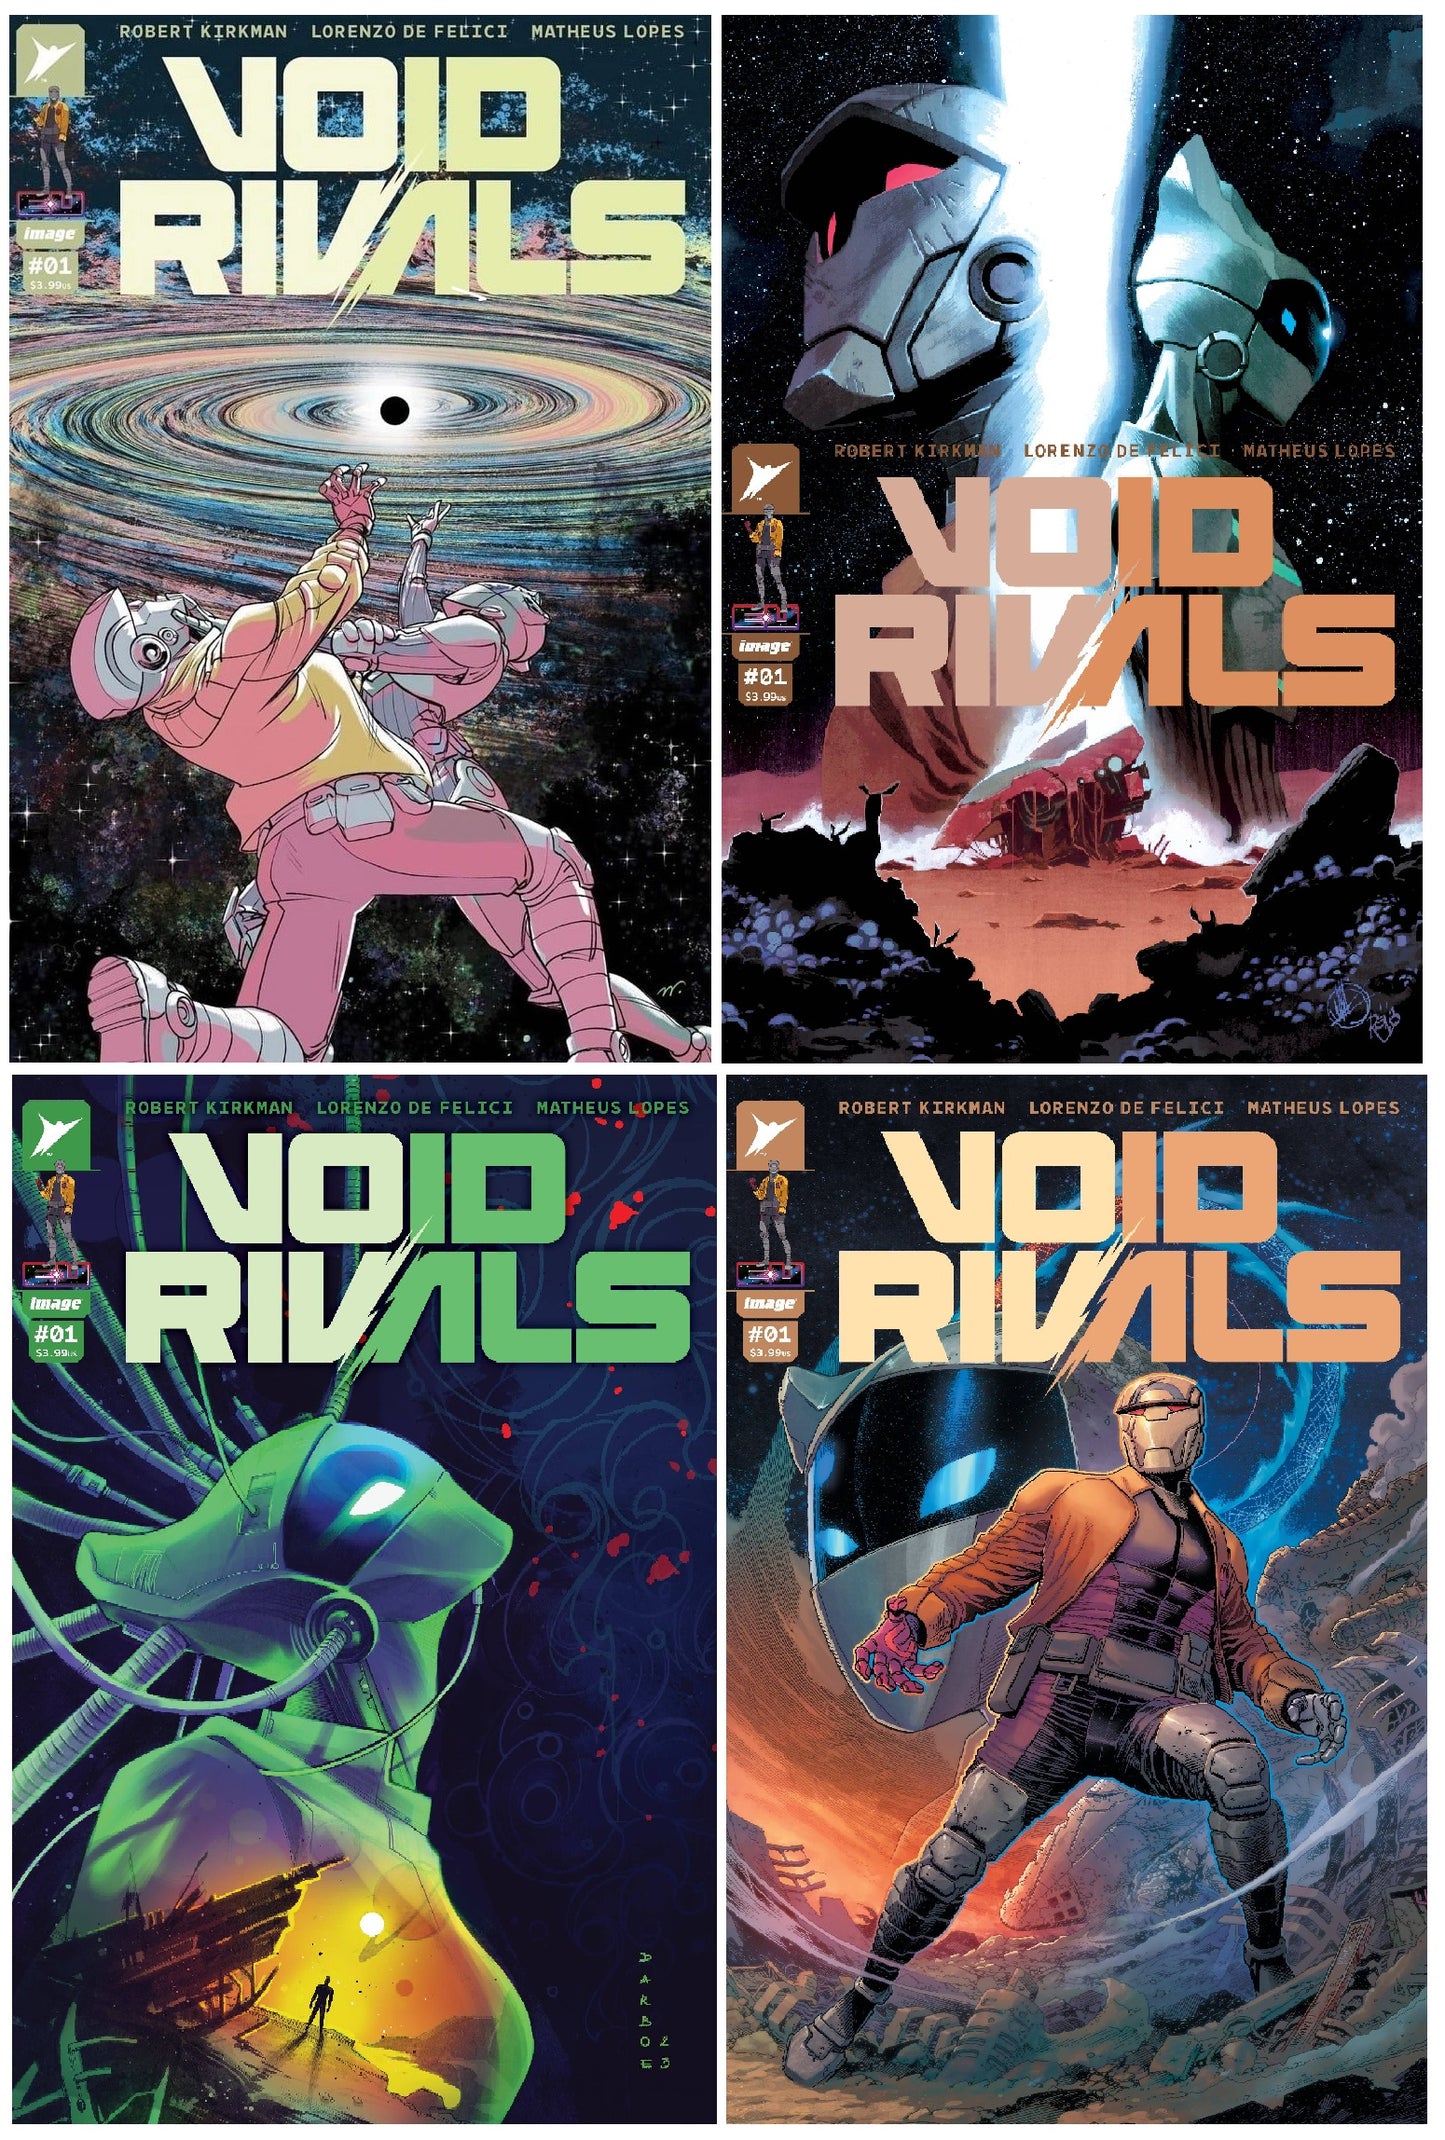 VOID RIVALS #1 MATTHEW ROBERTS VARIANT LIMITED TO 800 COPIES WITH NUMBERED COA + 1:10, 1:25 & 1:50 VARIANT